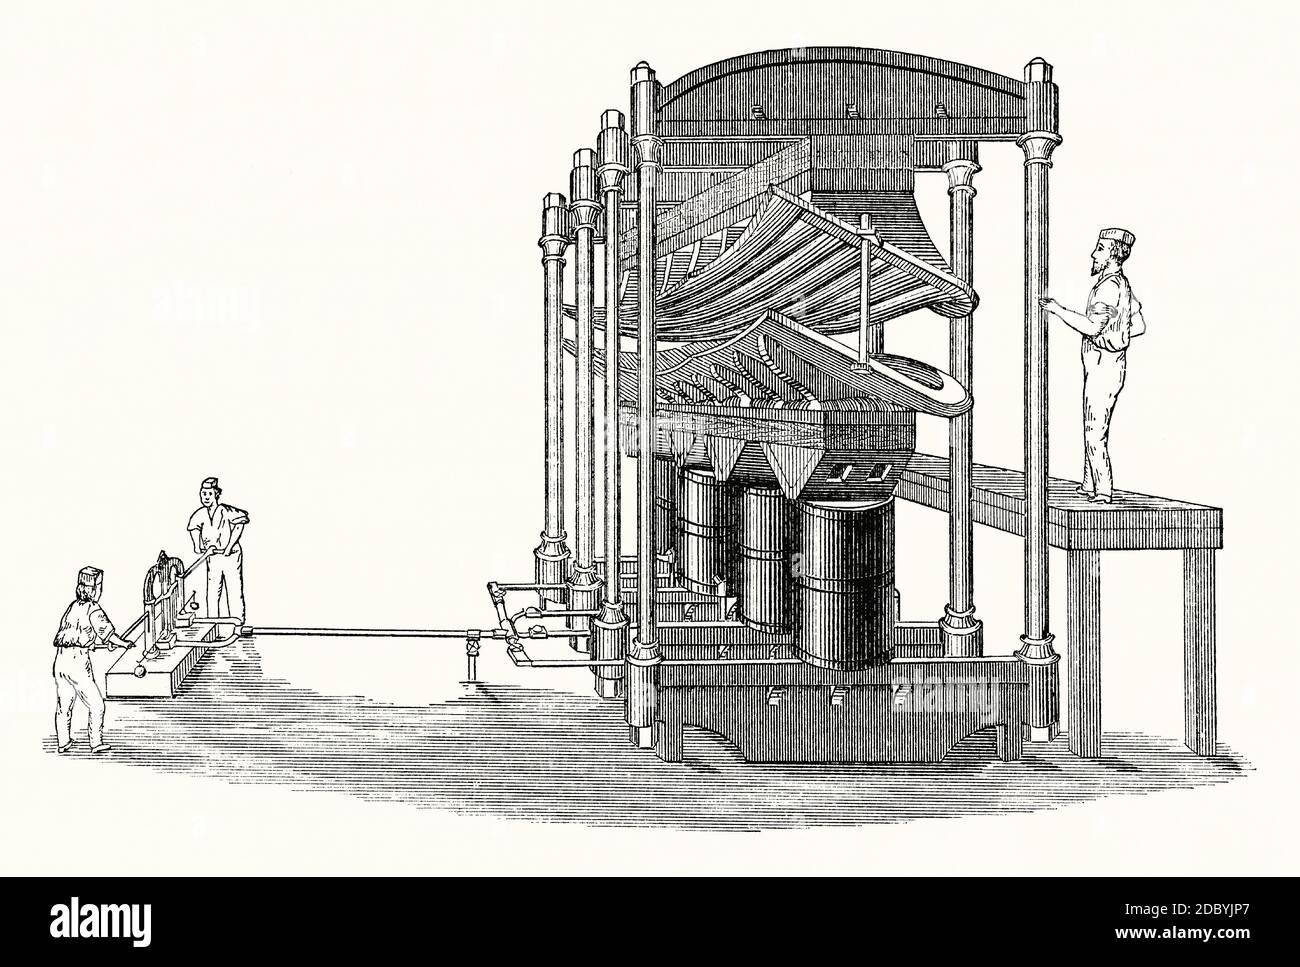 An old engraving of a hydraulic press used to press out the side panel of a life-boat in the mid-1800s. It is from a Victorian mechanical engineering book of the 1880s. In the mid-1840s, American Joseph Francis developed a new method for using steam-powered presses to stamp sheets of iron into corrugated shapes for boat hulls. With the Novelty Iron Works in New York, he began to manufacture lifeboats and coastal rescue craft in the 1840s. A hydraulic press (also known as a Bramah press after its English inventor ) is a machine press using a hydraulic cylinder to generate a compressive force. Stock Photo